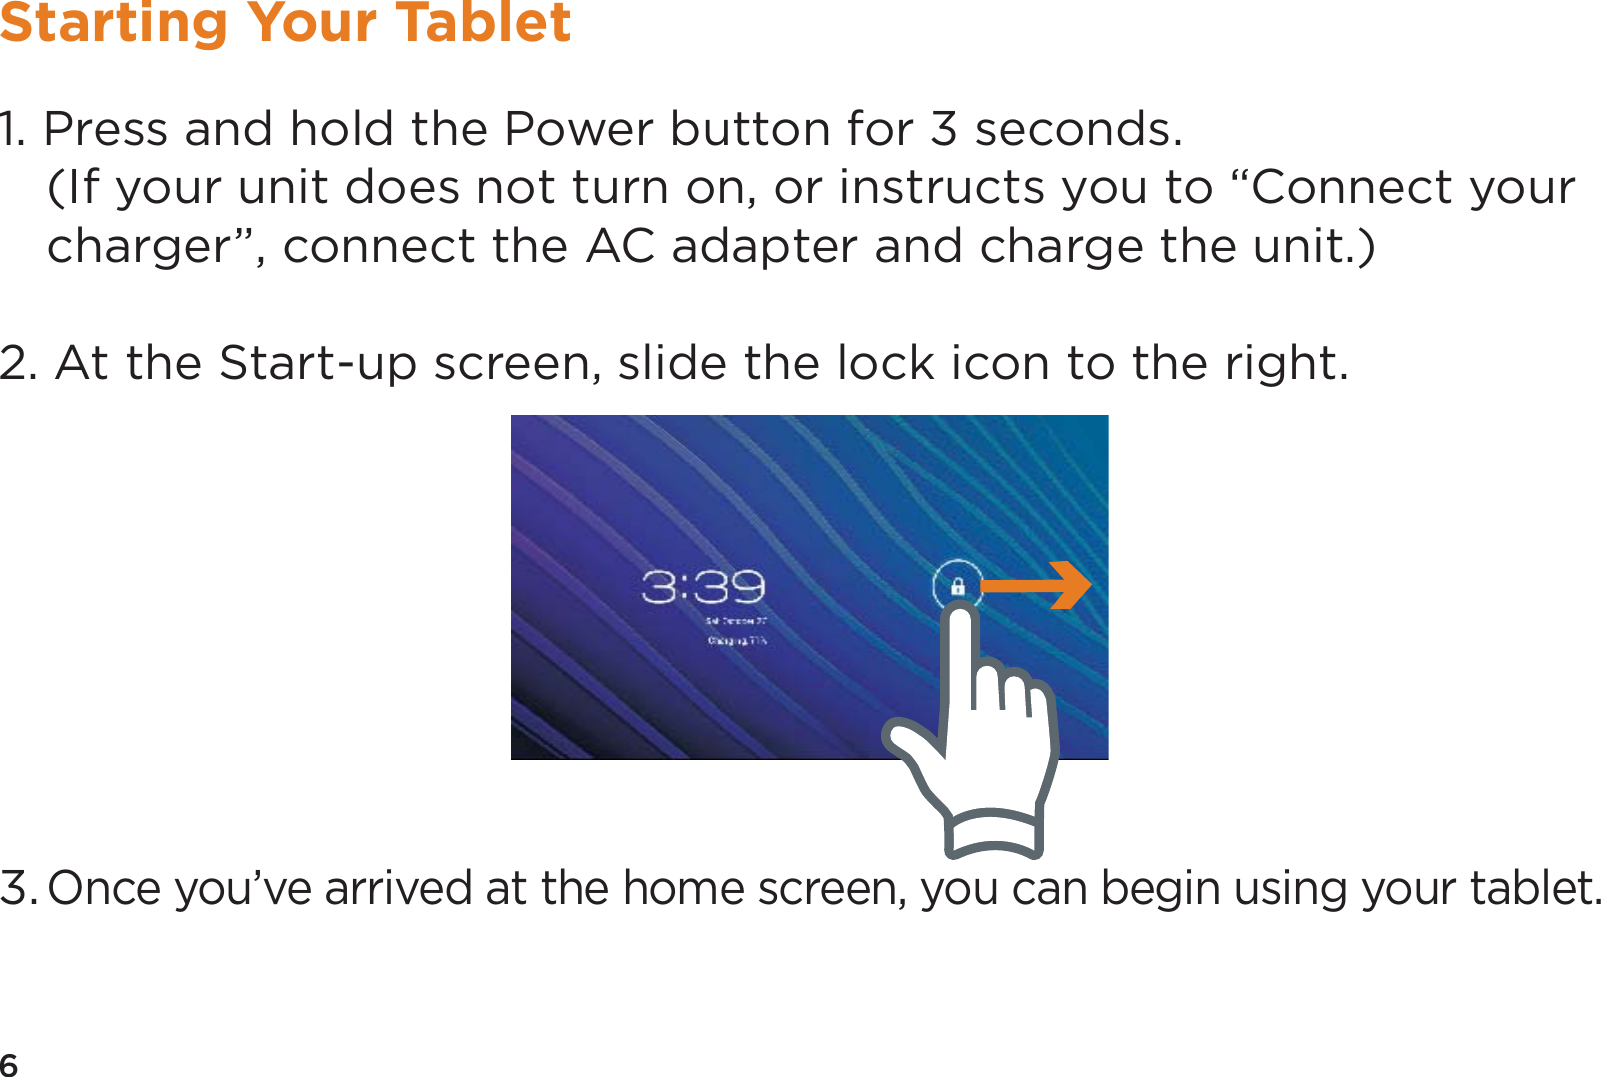 6Starting Your Tablet1. Press and hold the Power button for 3 seconds.  (If your unit does not turn on, or instructs you to “Connect your charger”, connect the AC adapter and charge the unit.)2. At the Start-up screen, slide the lock icon to the right.3. Once you’ve arrived at the home screen, you can begin using your tablet.